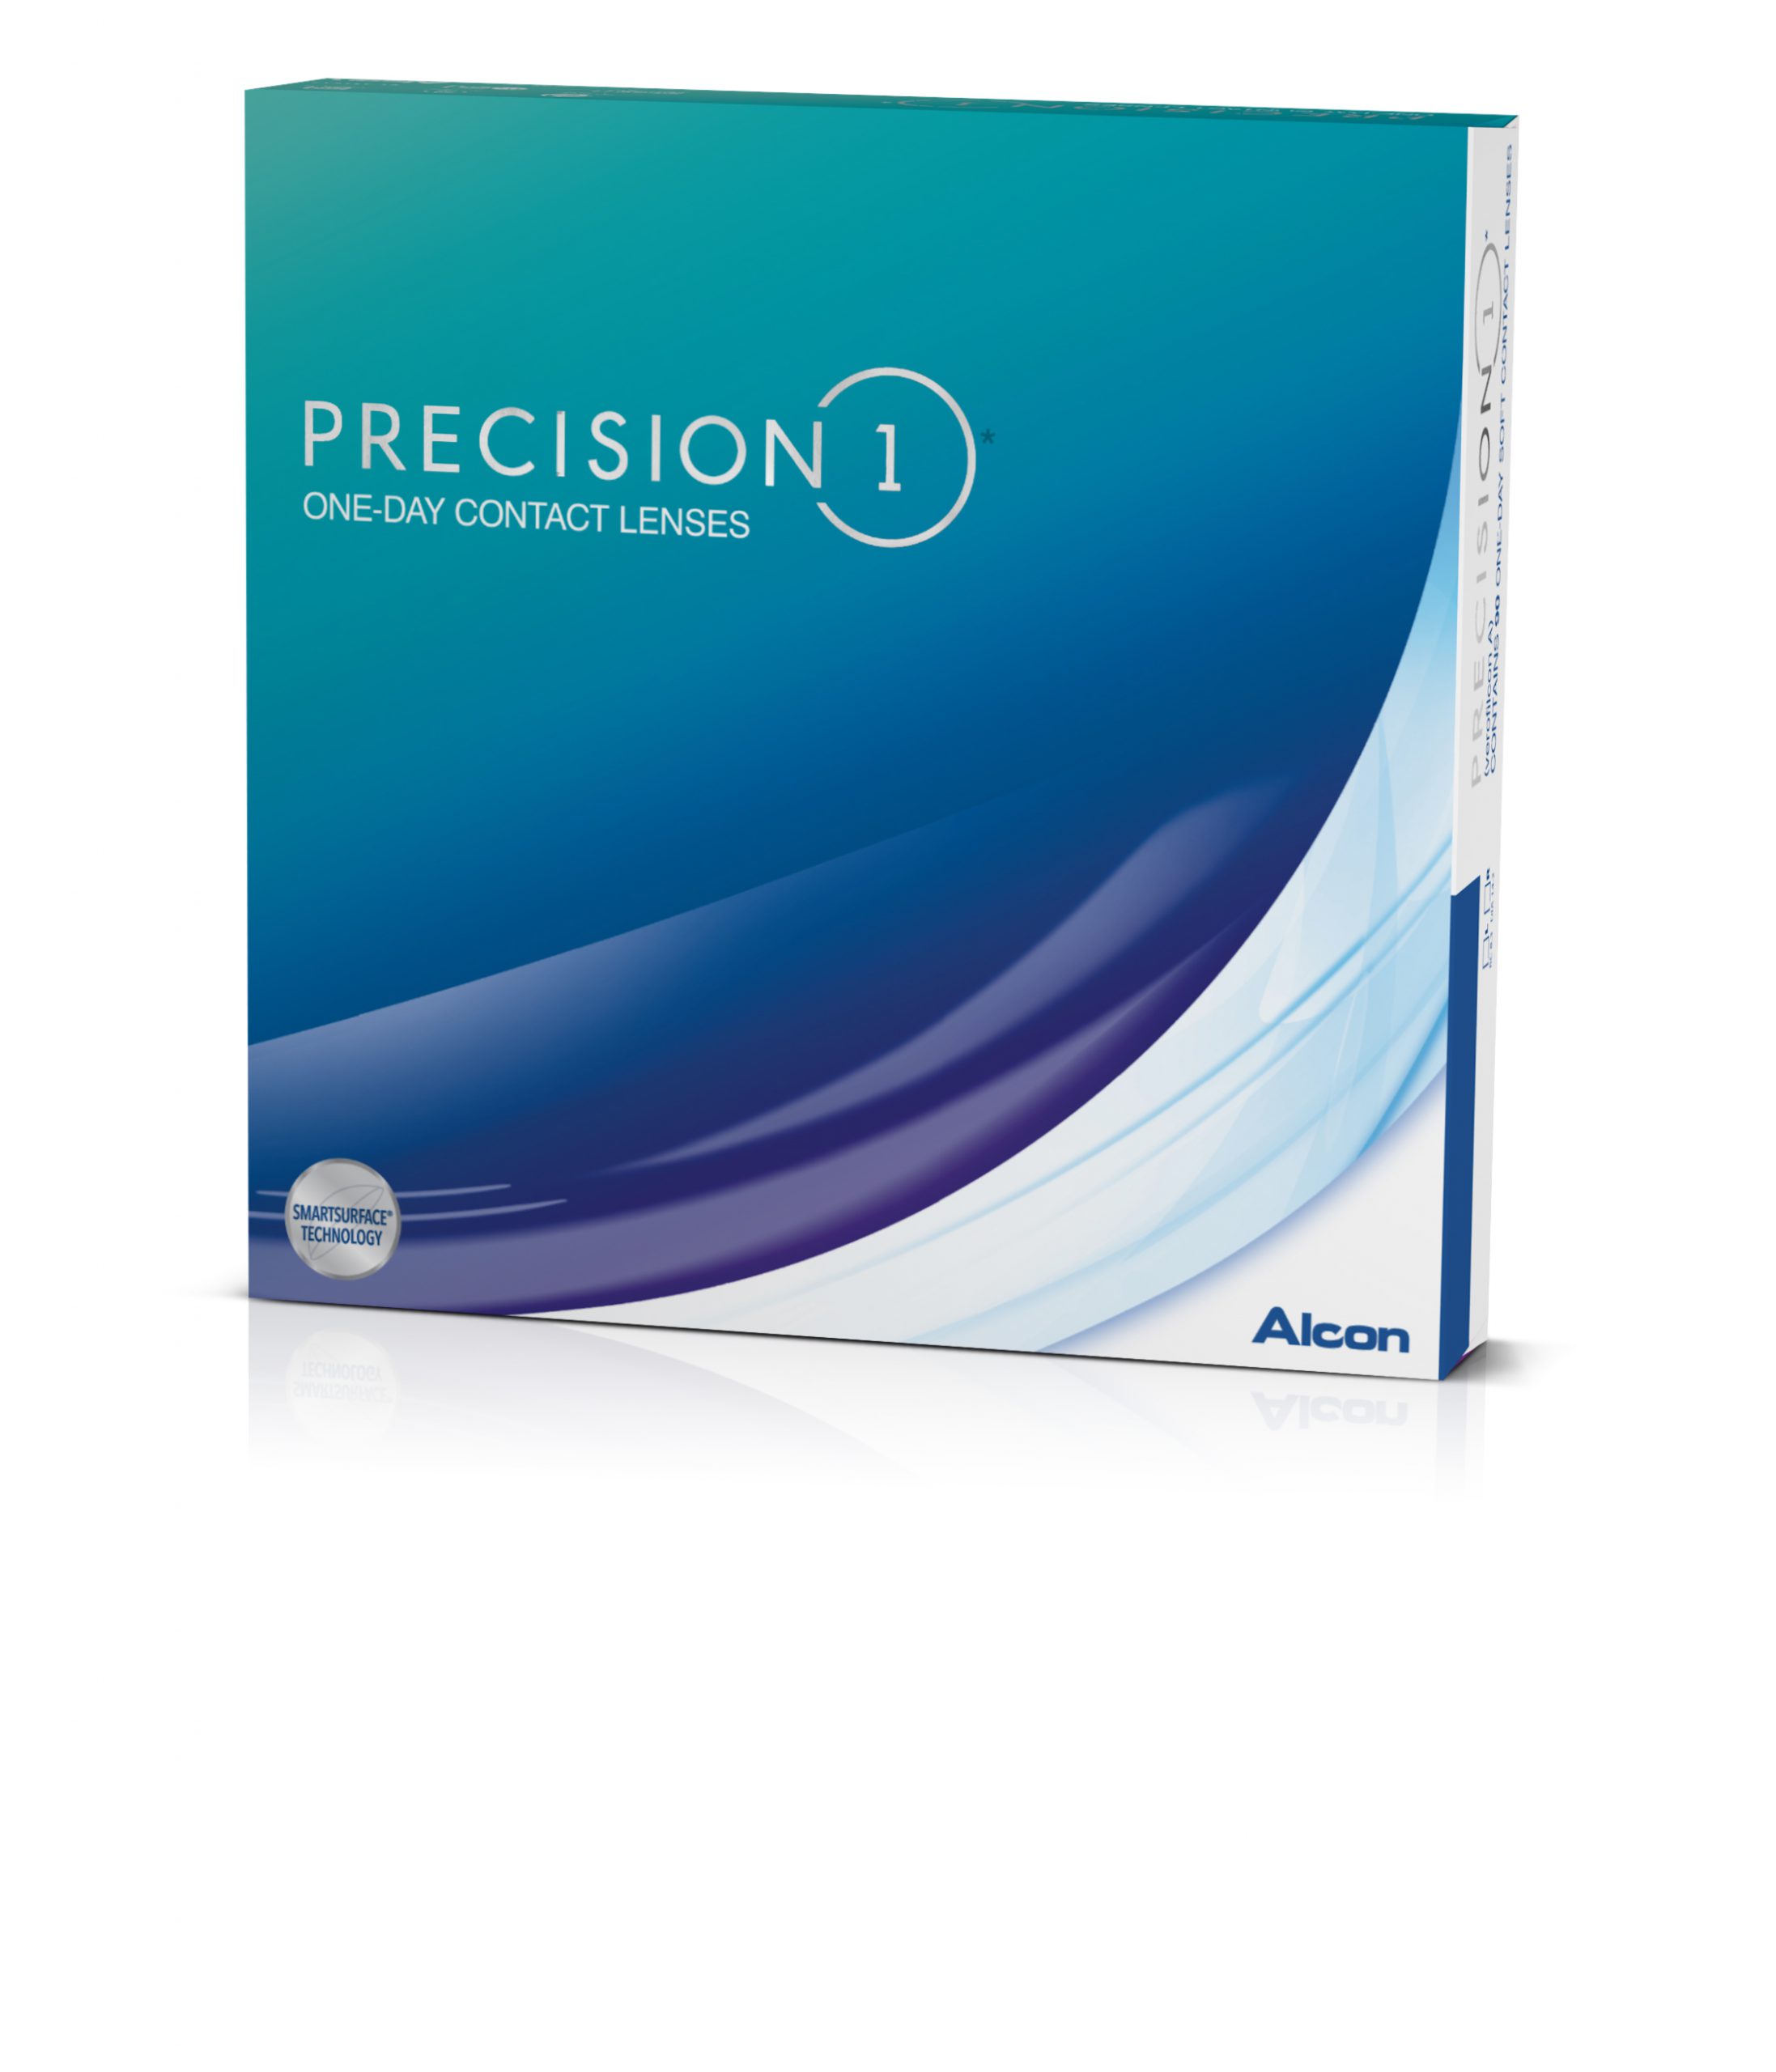 Alcon precision 1 90 pack carefirst federal 2012